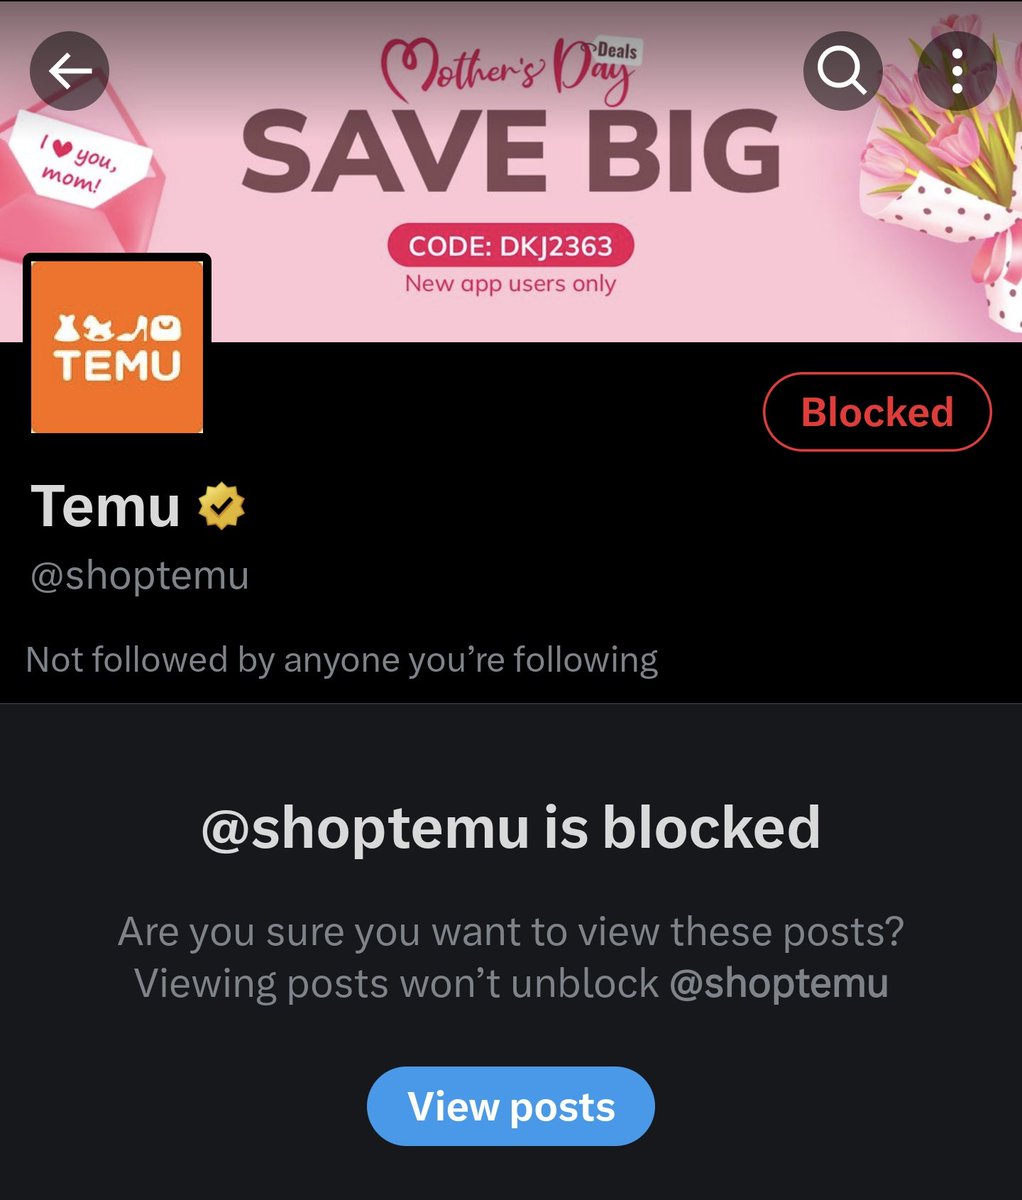 Even if you have an account blocked, you can still be served ads that give you no option to block, mute, or even report an issue.